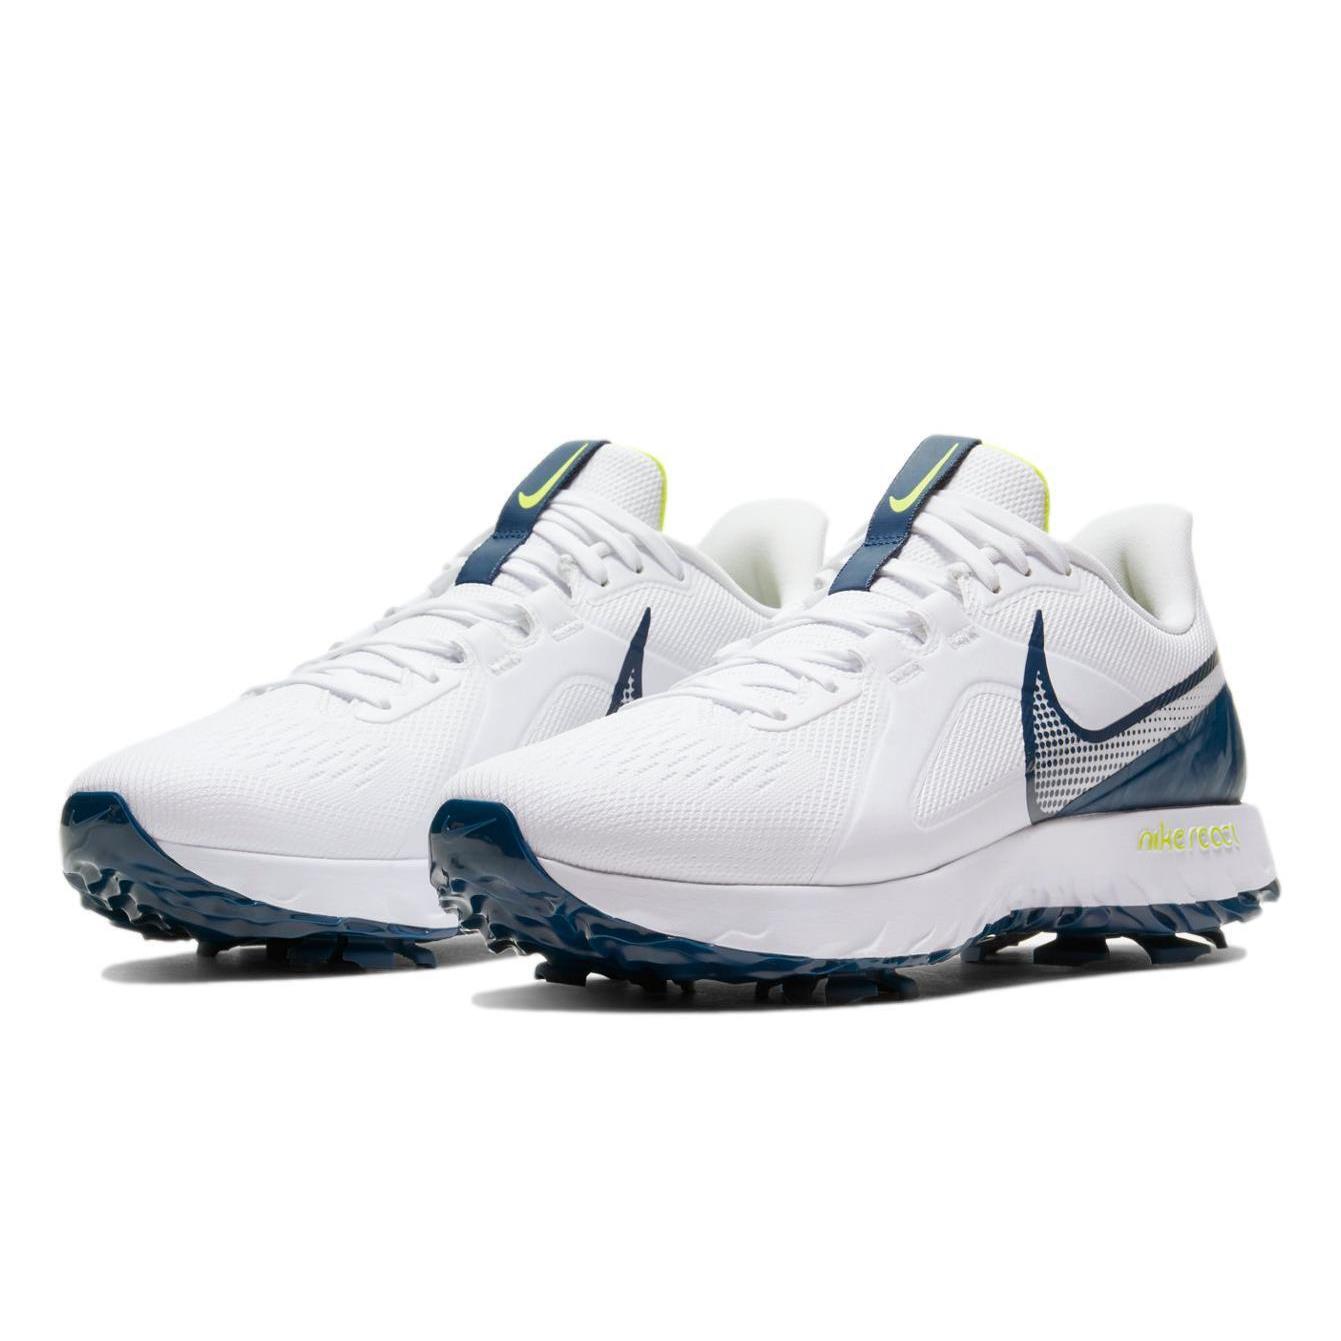 Nike Men`s React Infinity Pro Golf Shoes Cleats `white Valerian Blue` CT6620-100